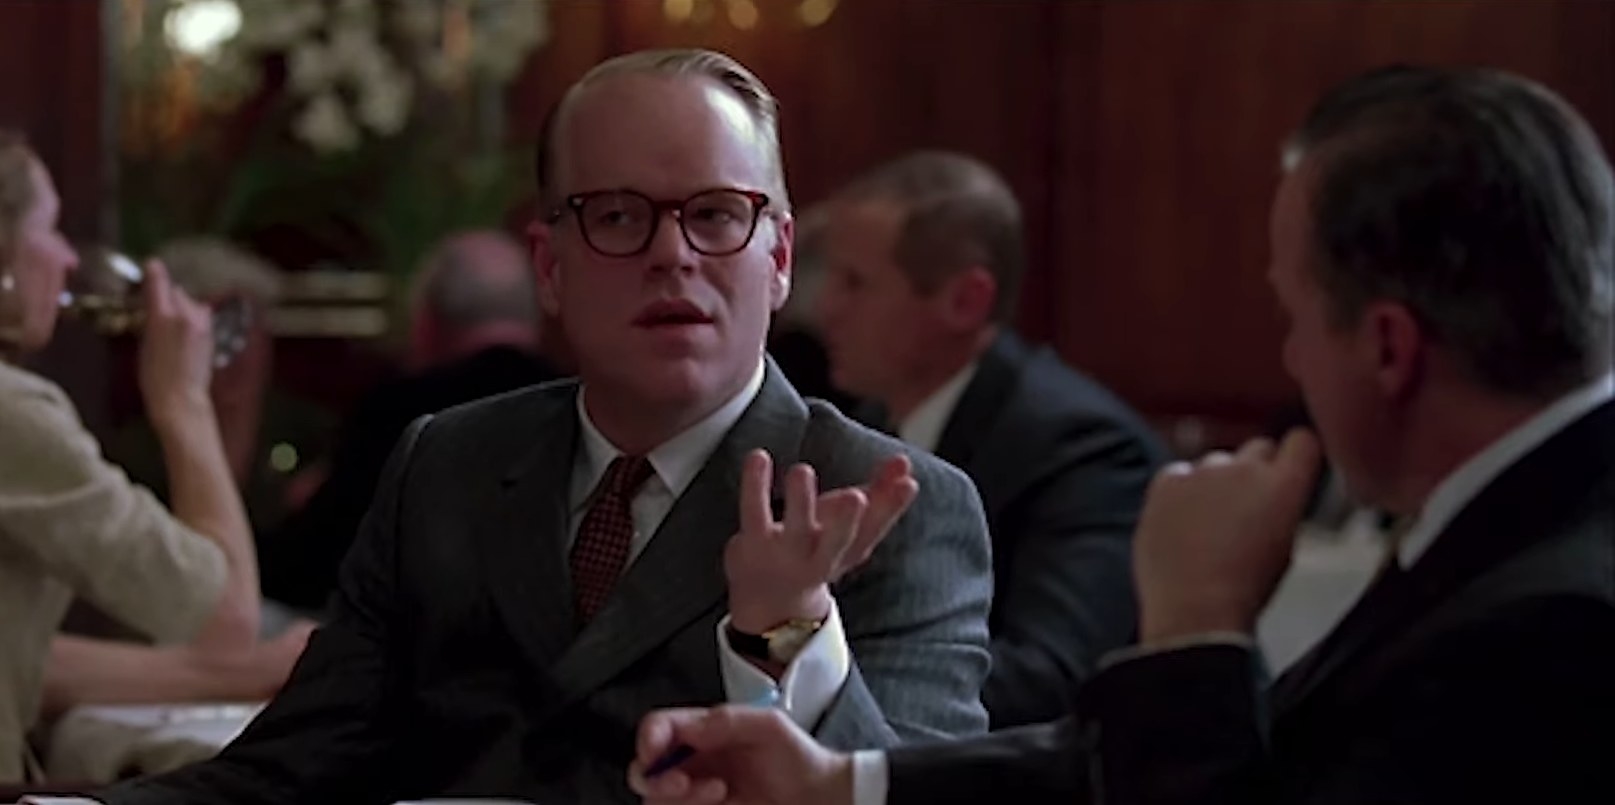 Philip Seymour Hoffman as Truman Captoe, talking to someone at a meal